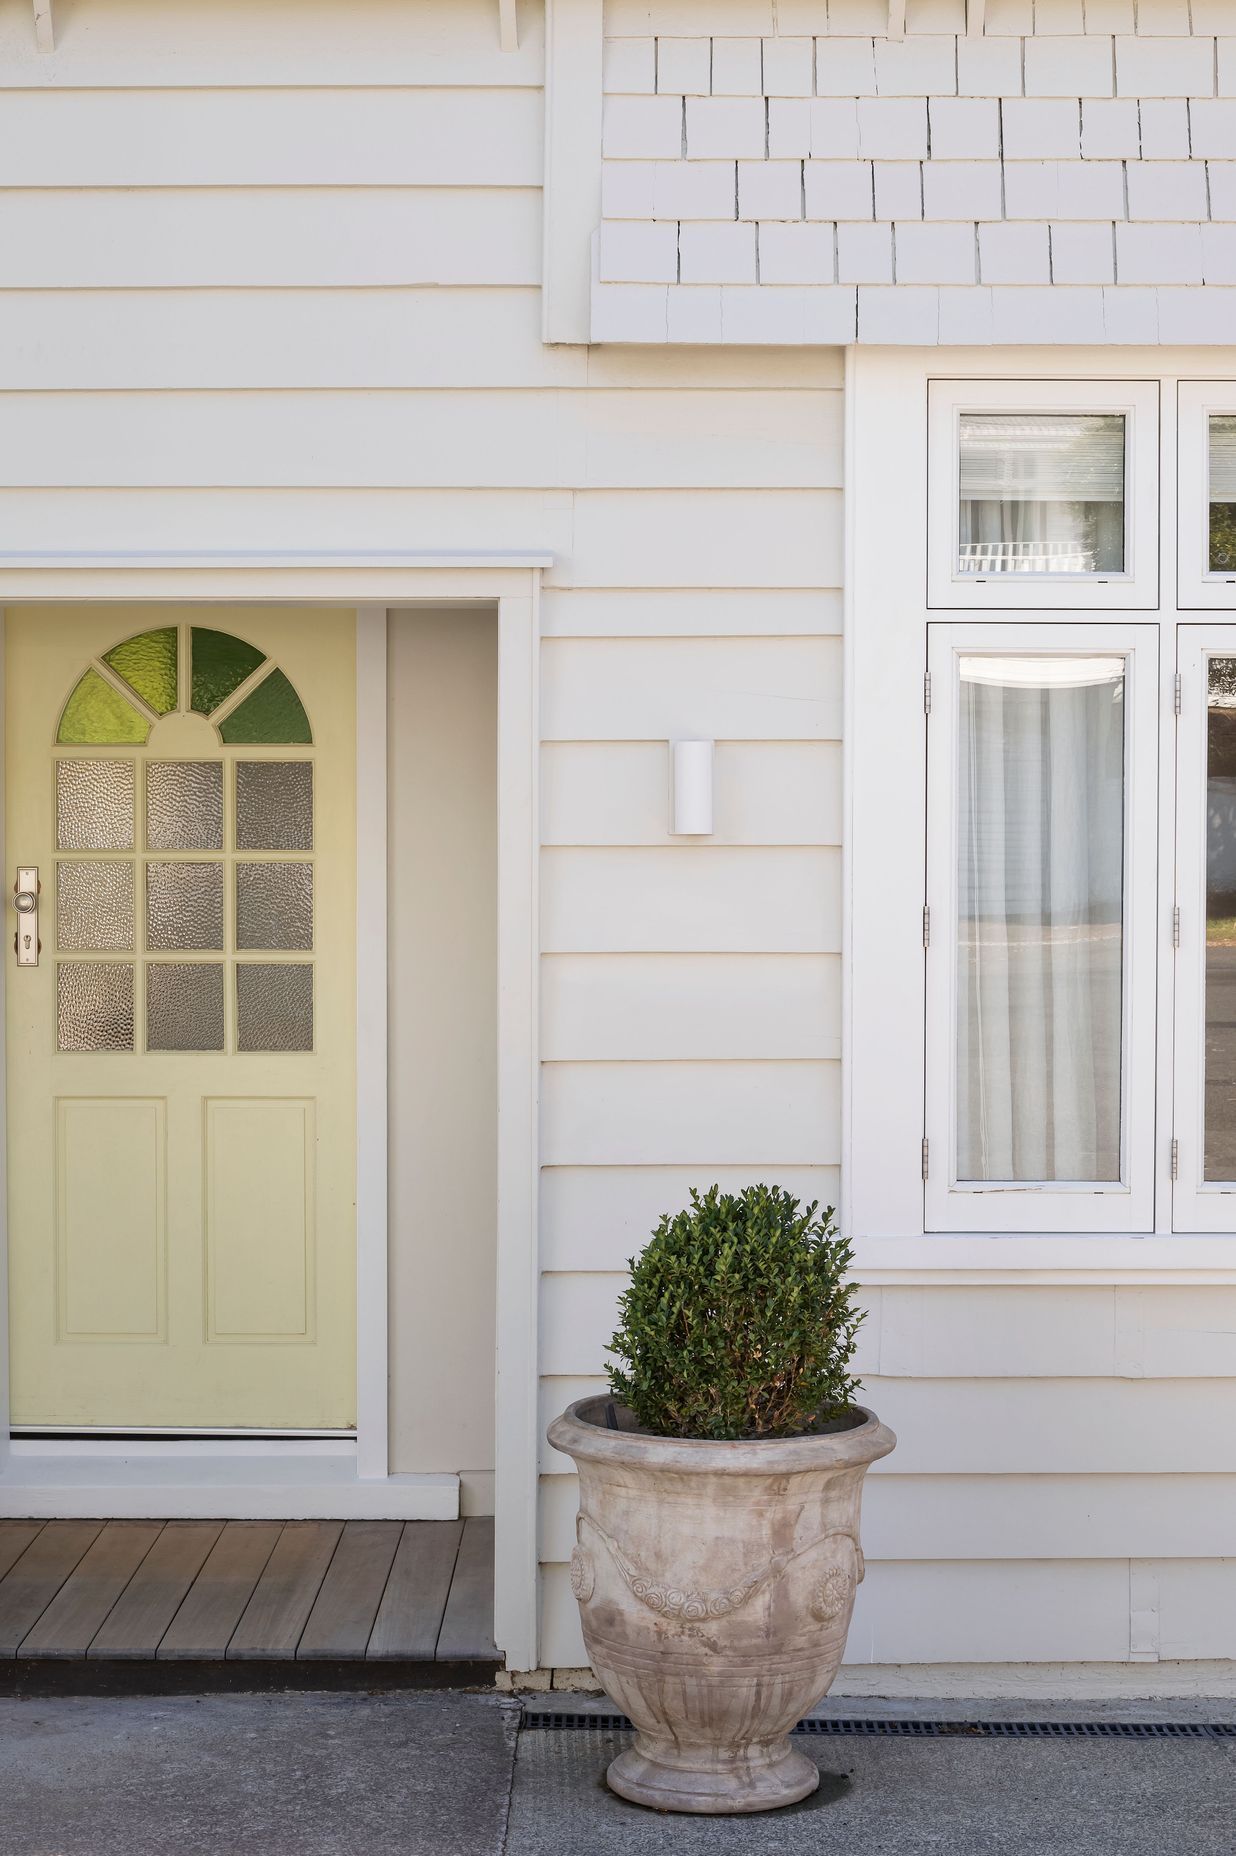 The butter yellow door adds a pop of colour to the entryway. Photo: David Straight